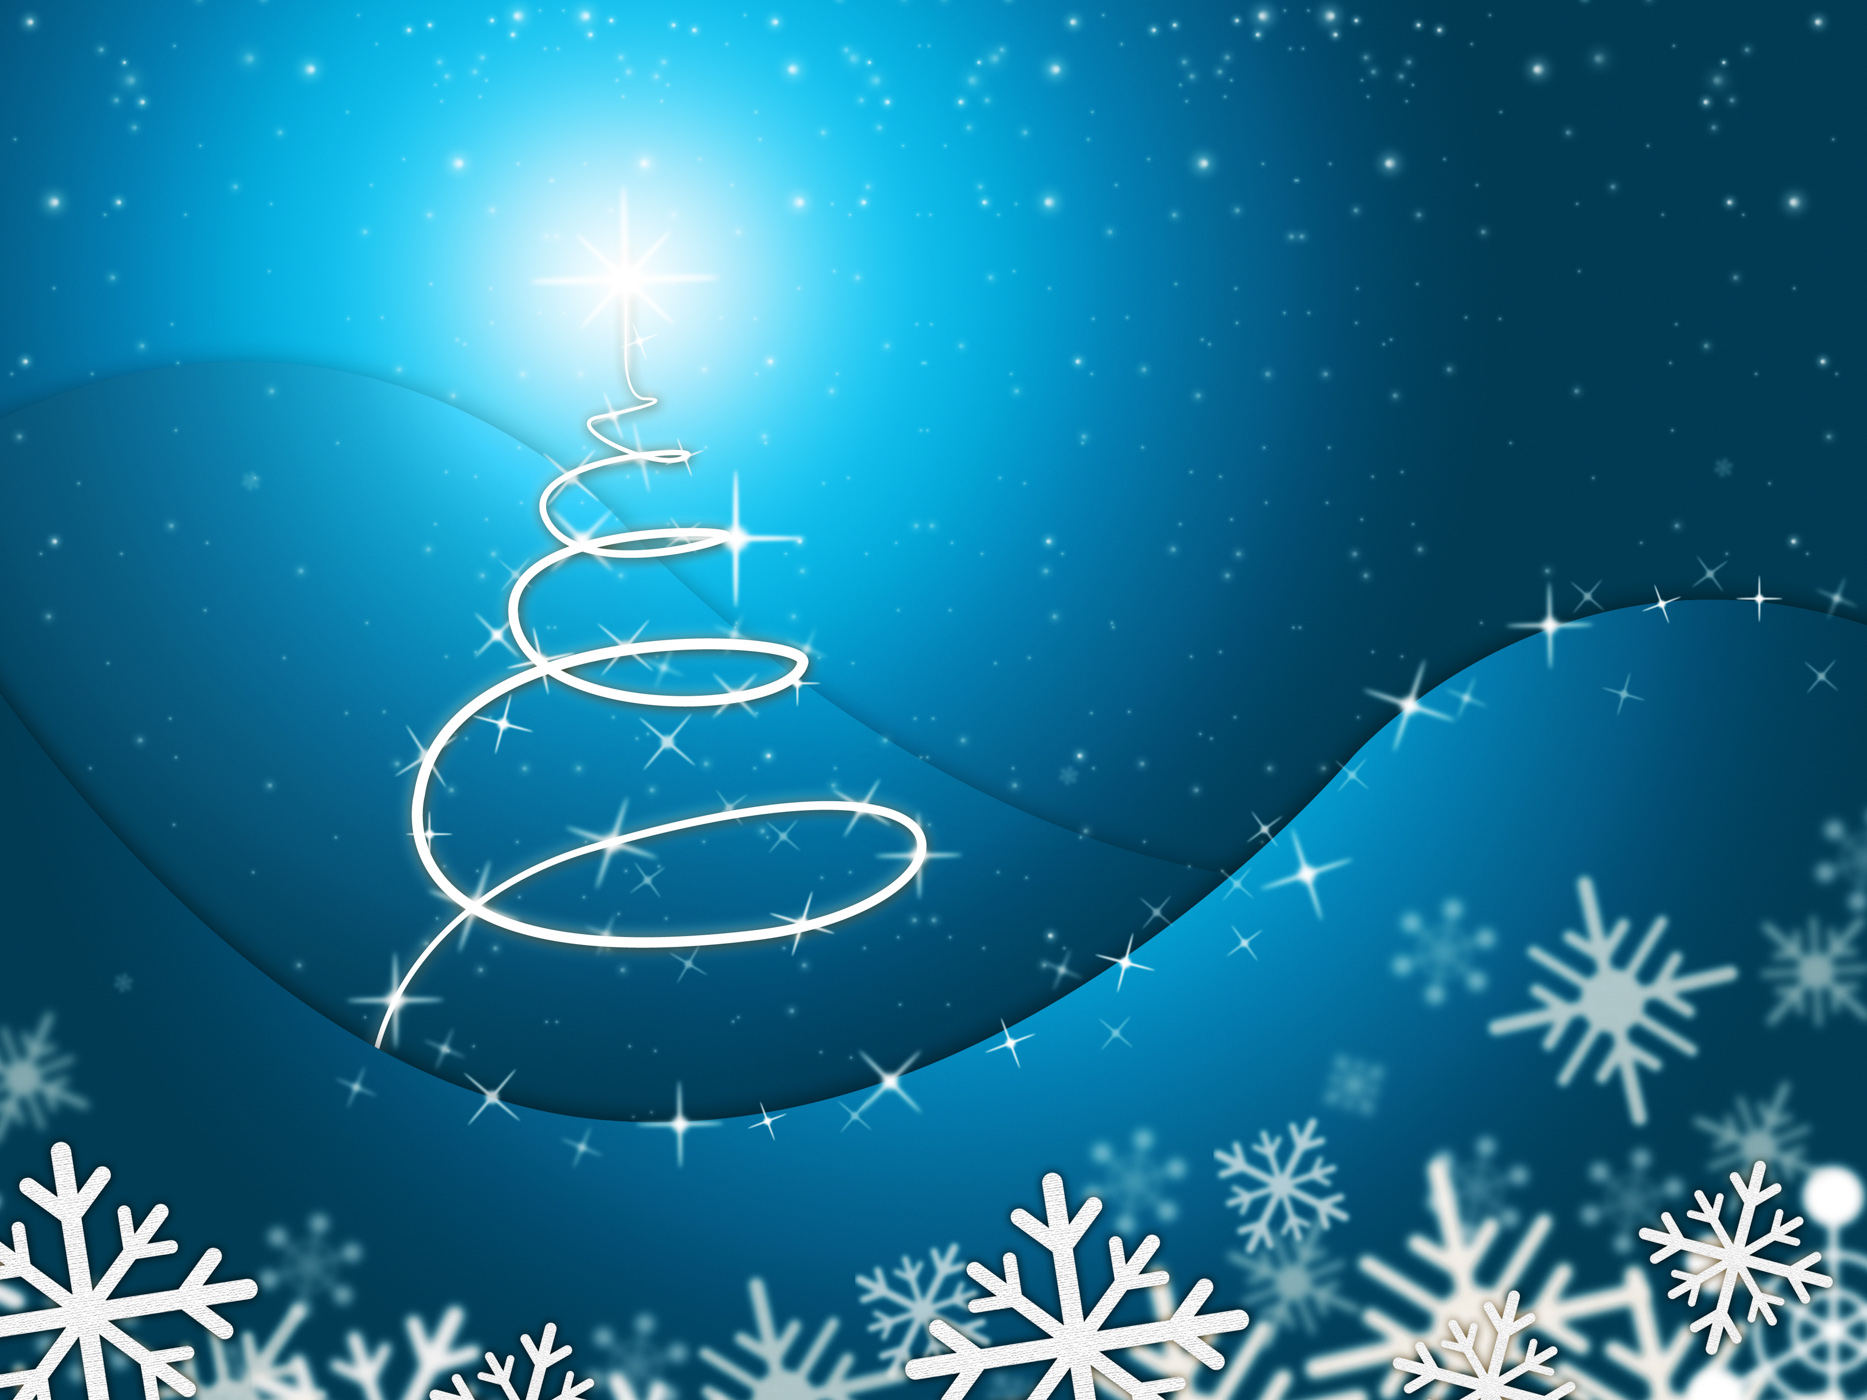 Xmas Tree Represents New Year And Backdrop, Abstract, Icecrystal, Winter, Snowy, HQ Photo